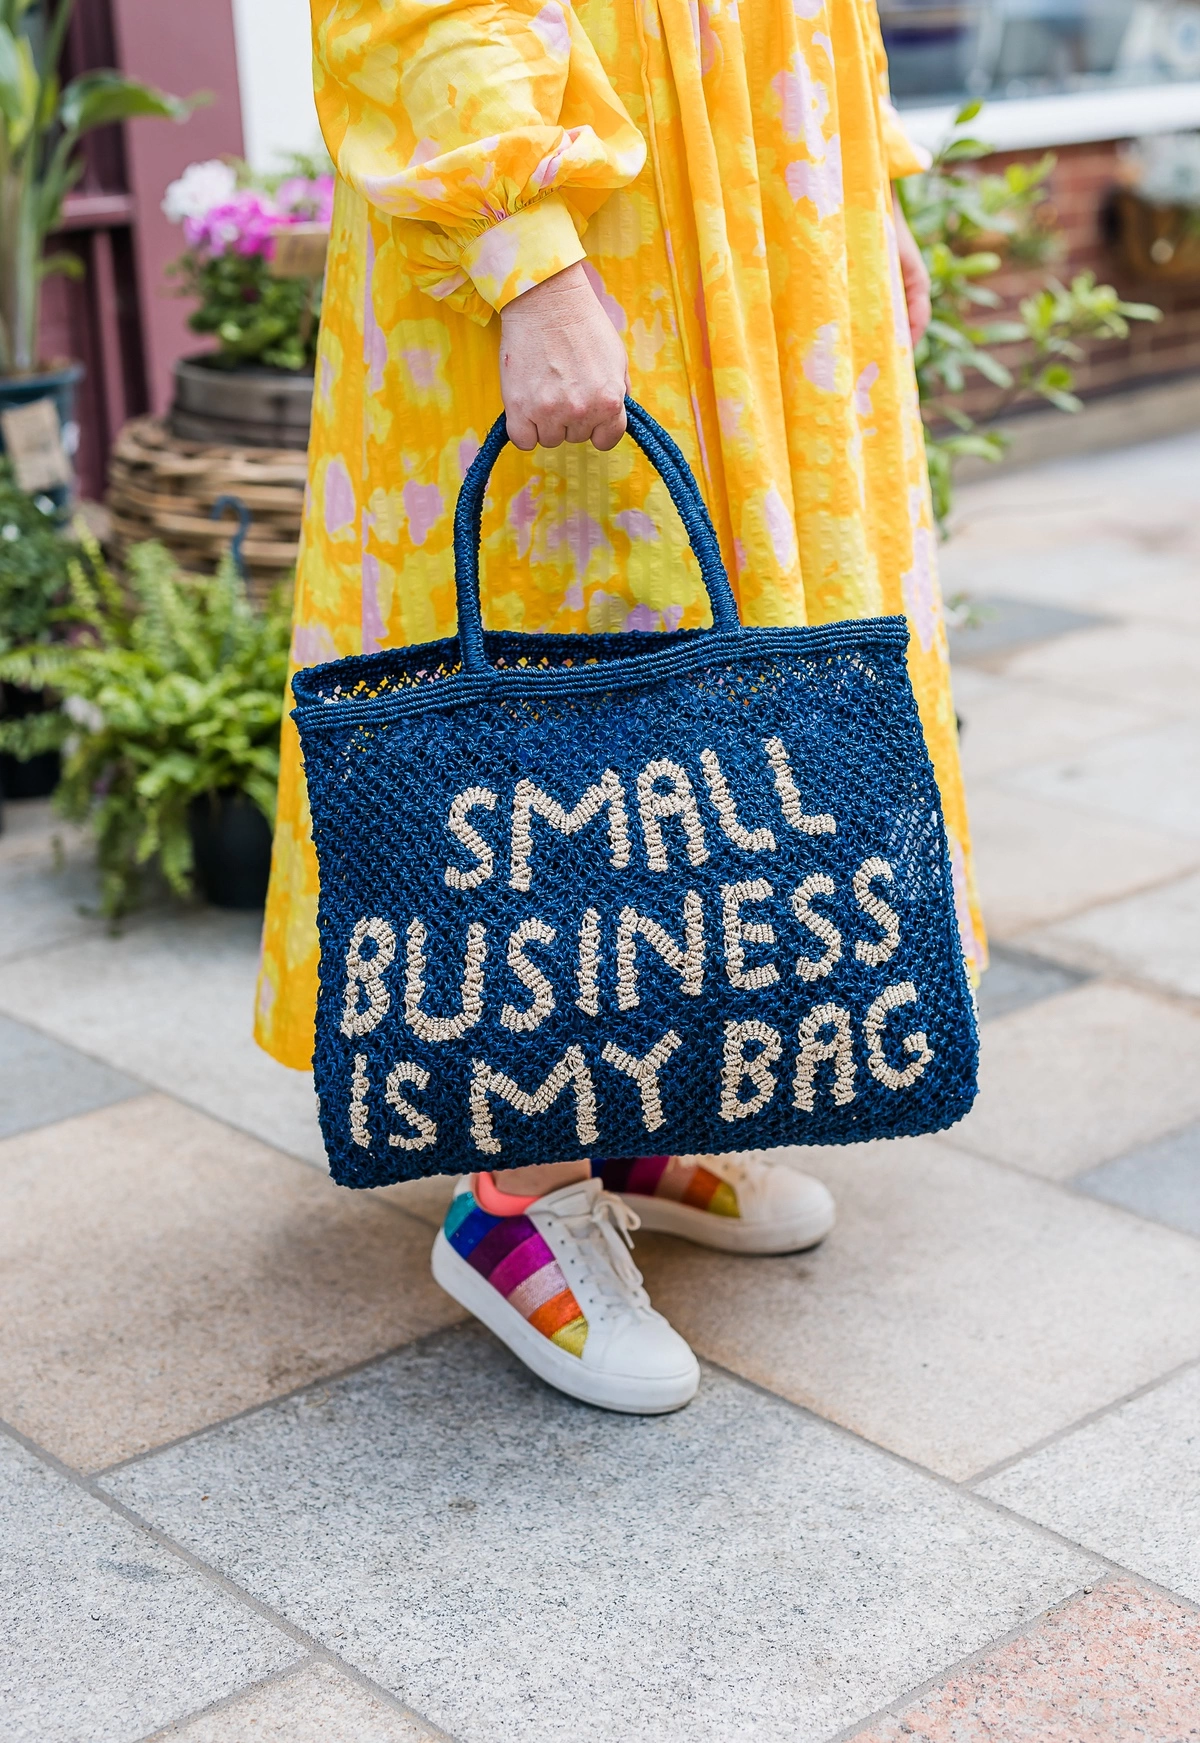 Small business is my bag